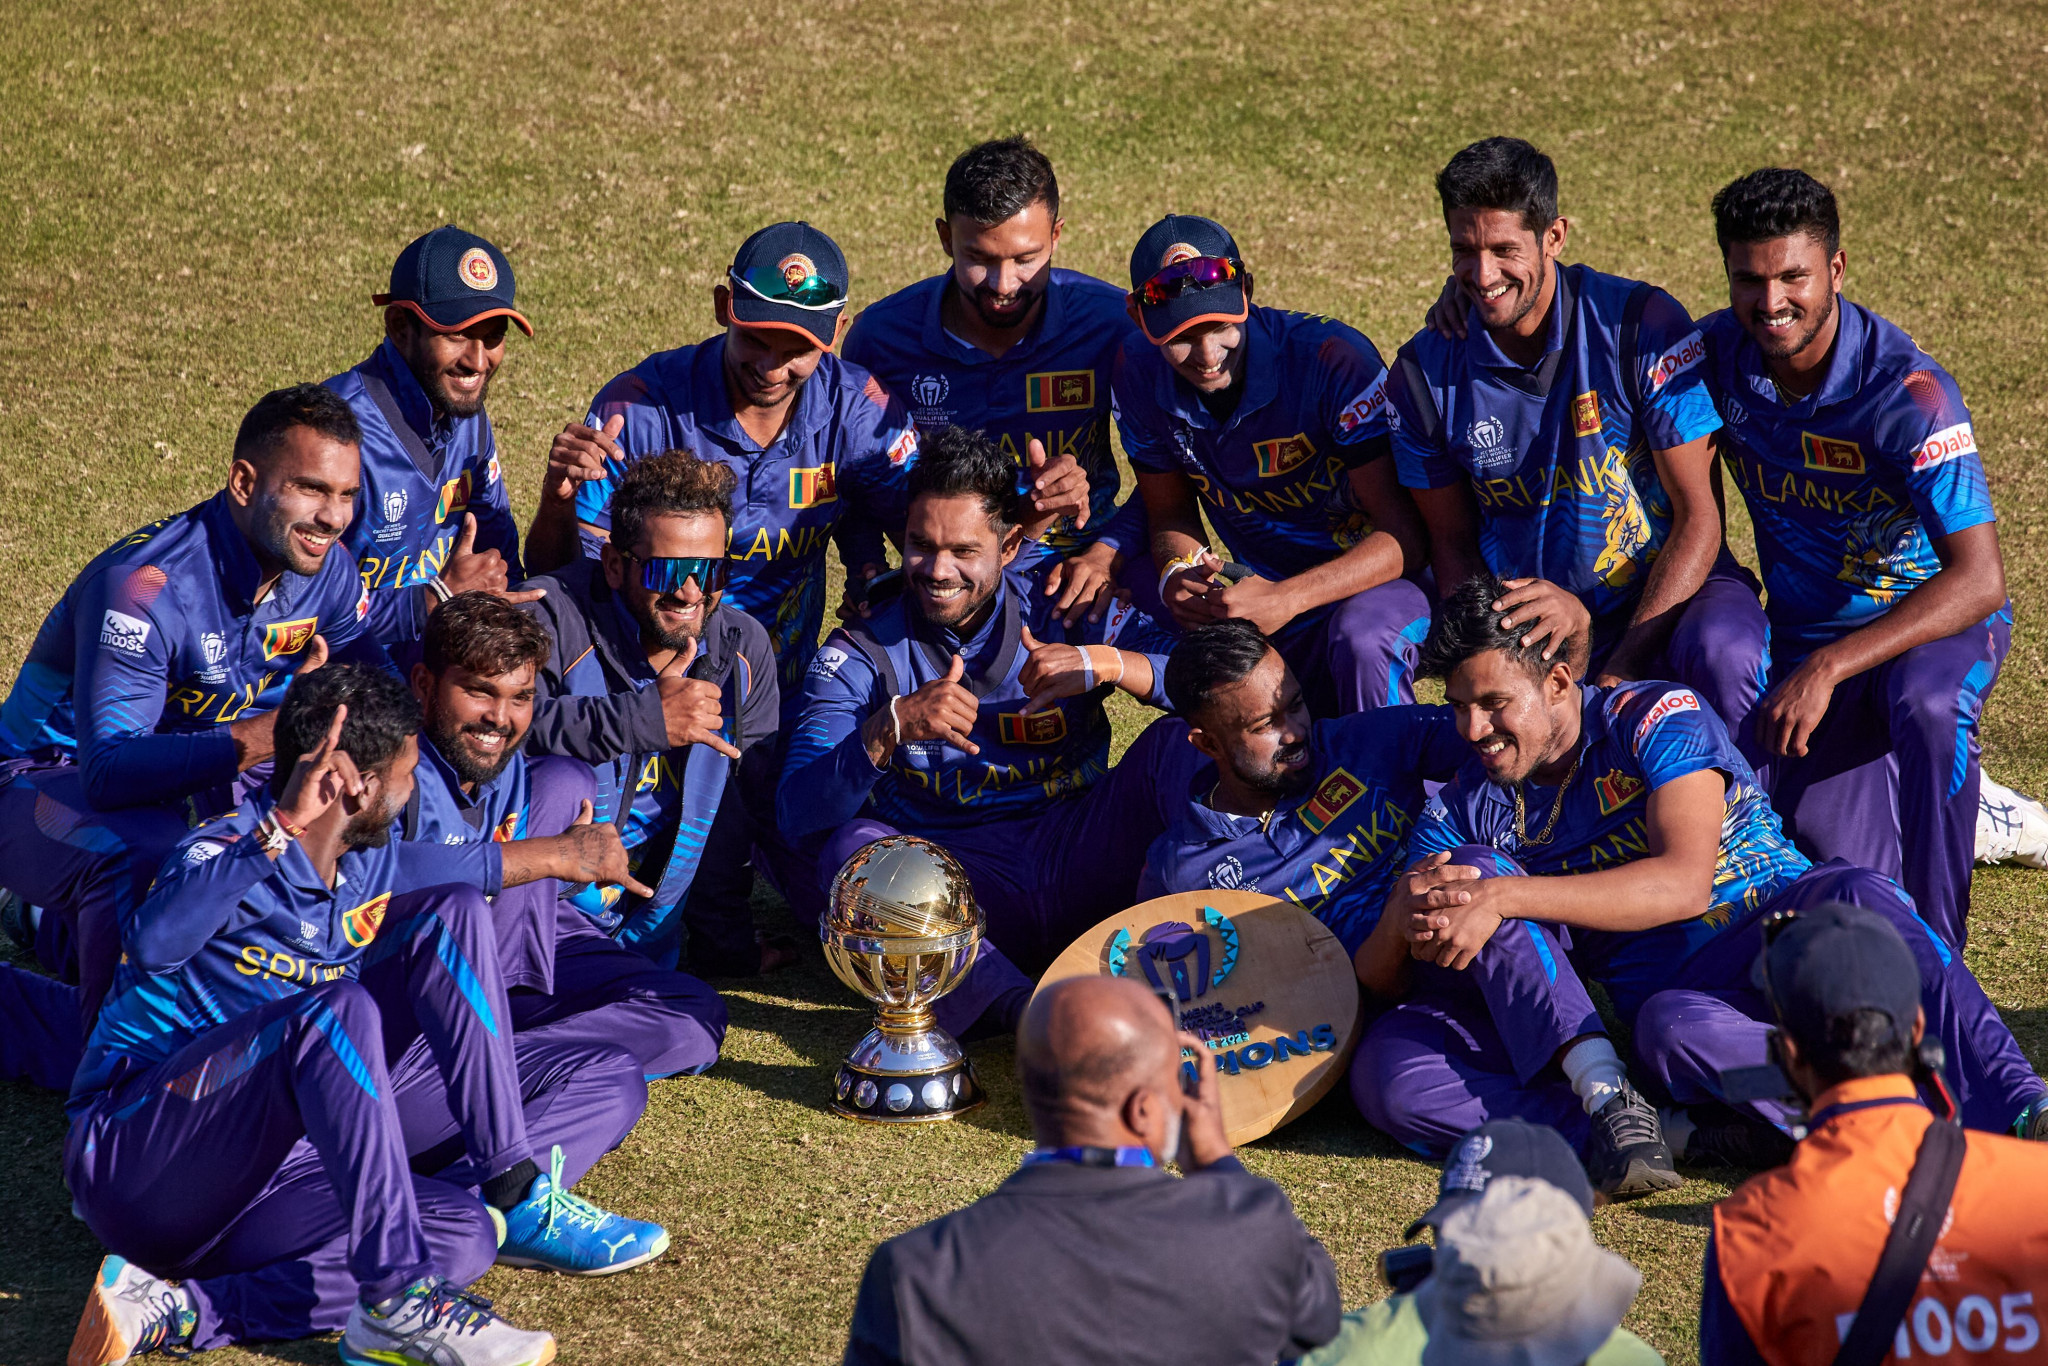 Sri Lanka won the ICC's World Cup qualifying tournament for the first time since 1979 ©Getty Images